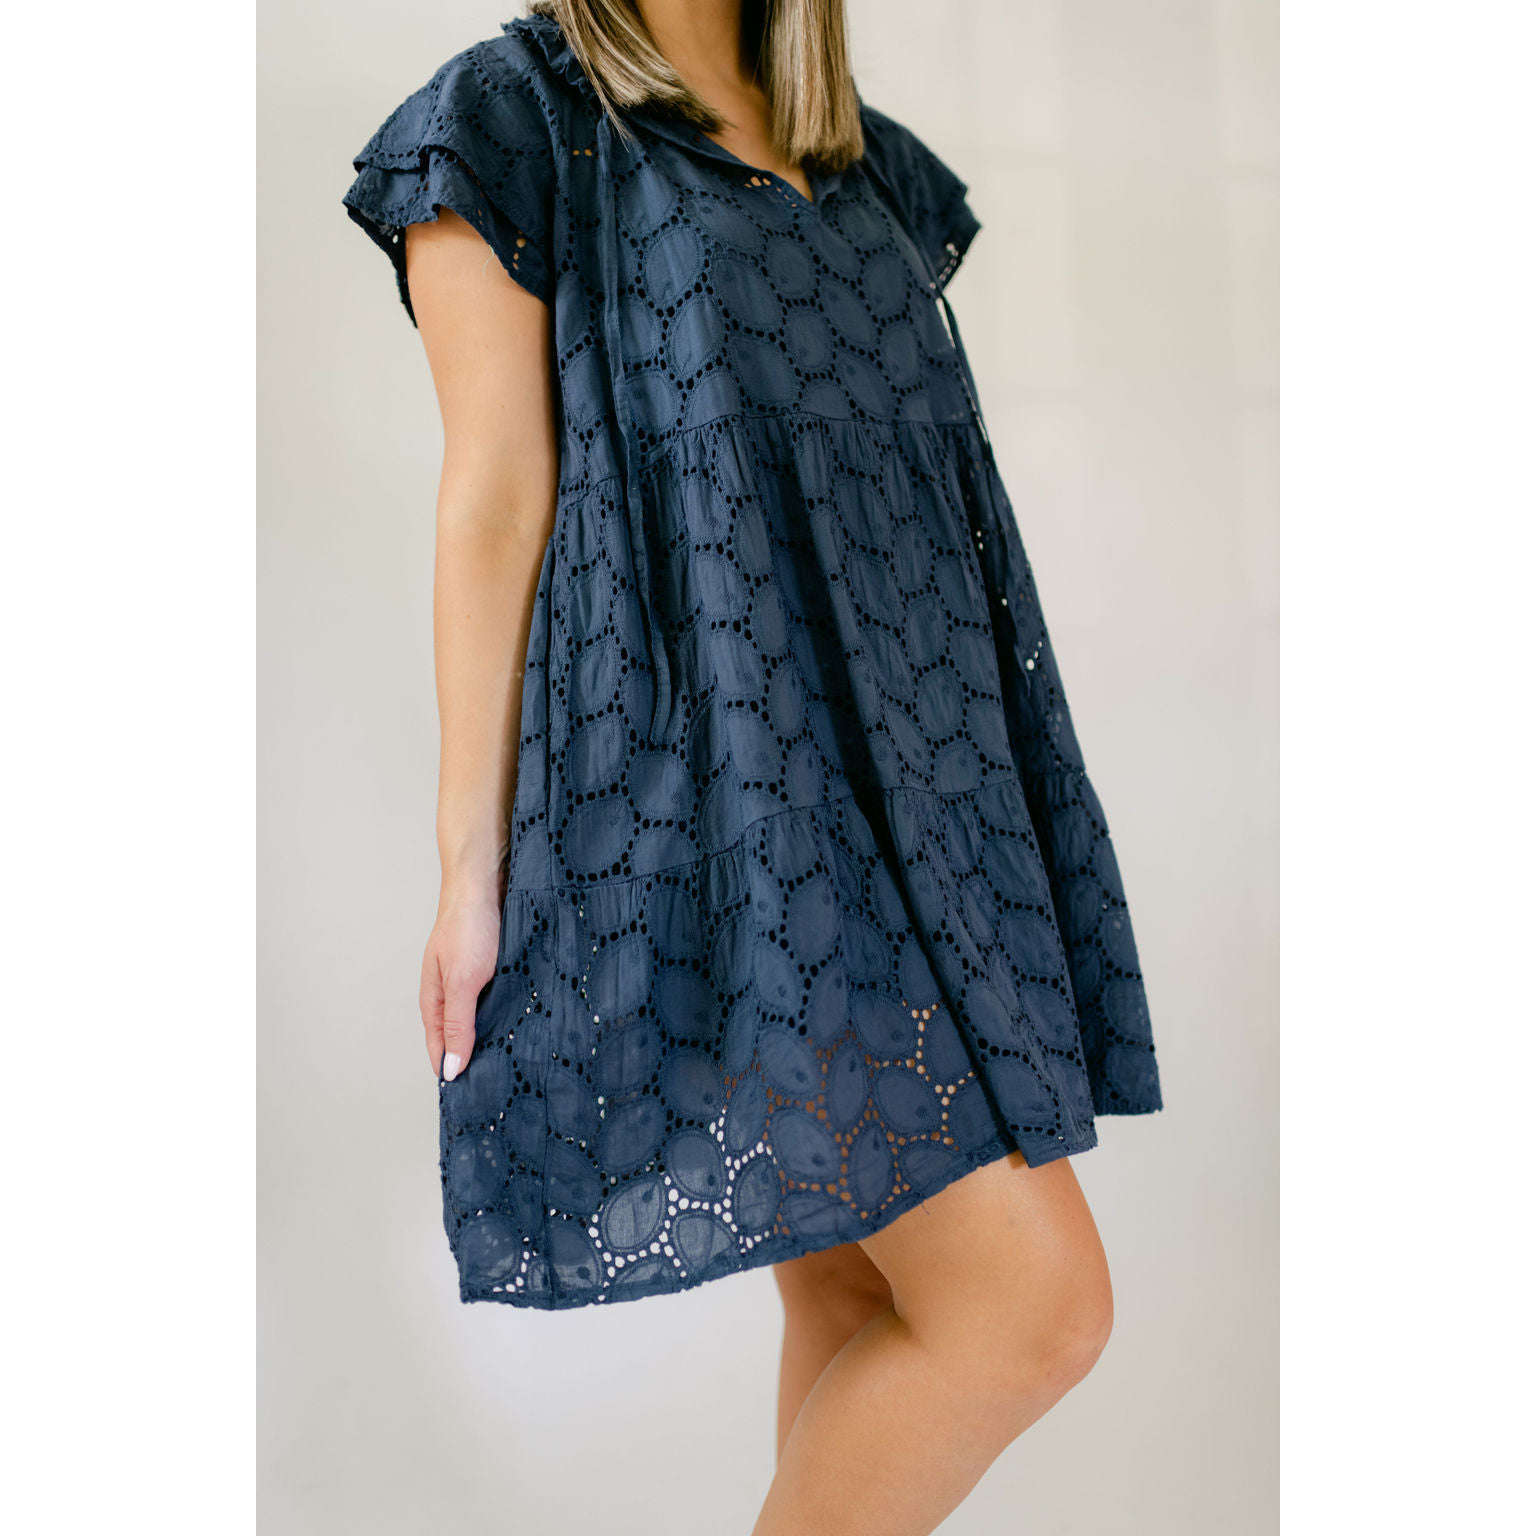 8.28 Boutique:Sofia Collections,Sofia Collections Jules Eyelet Navy Dress,Dress